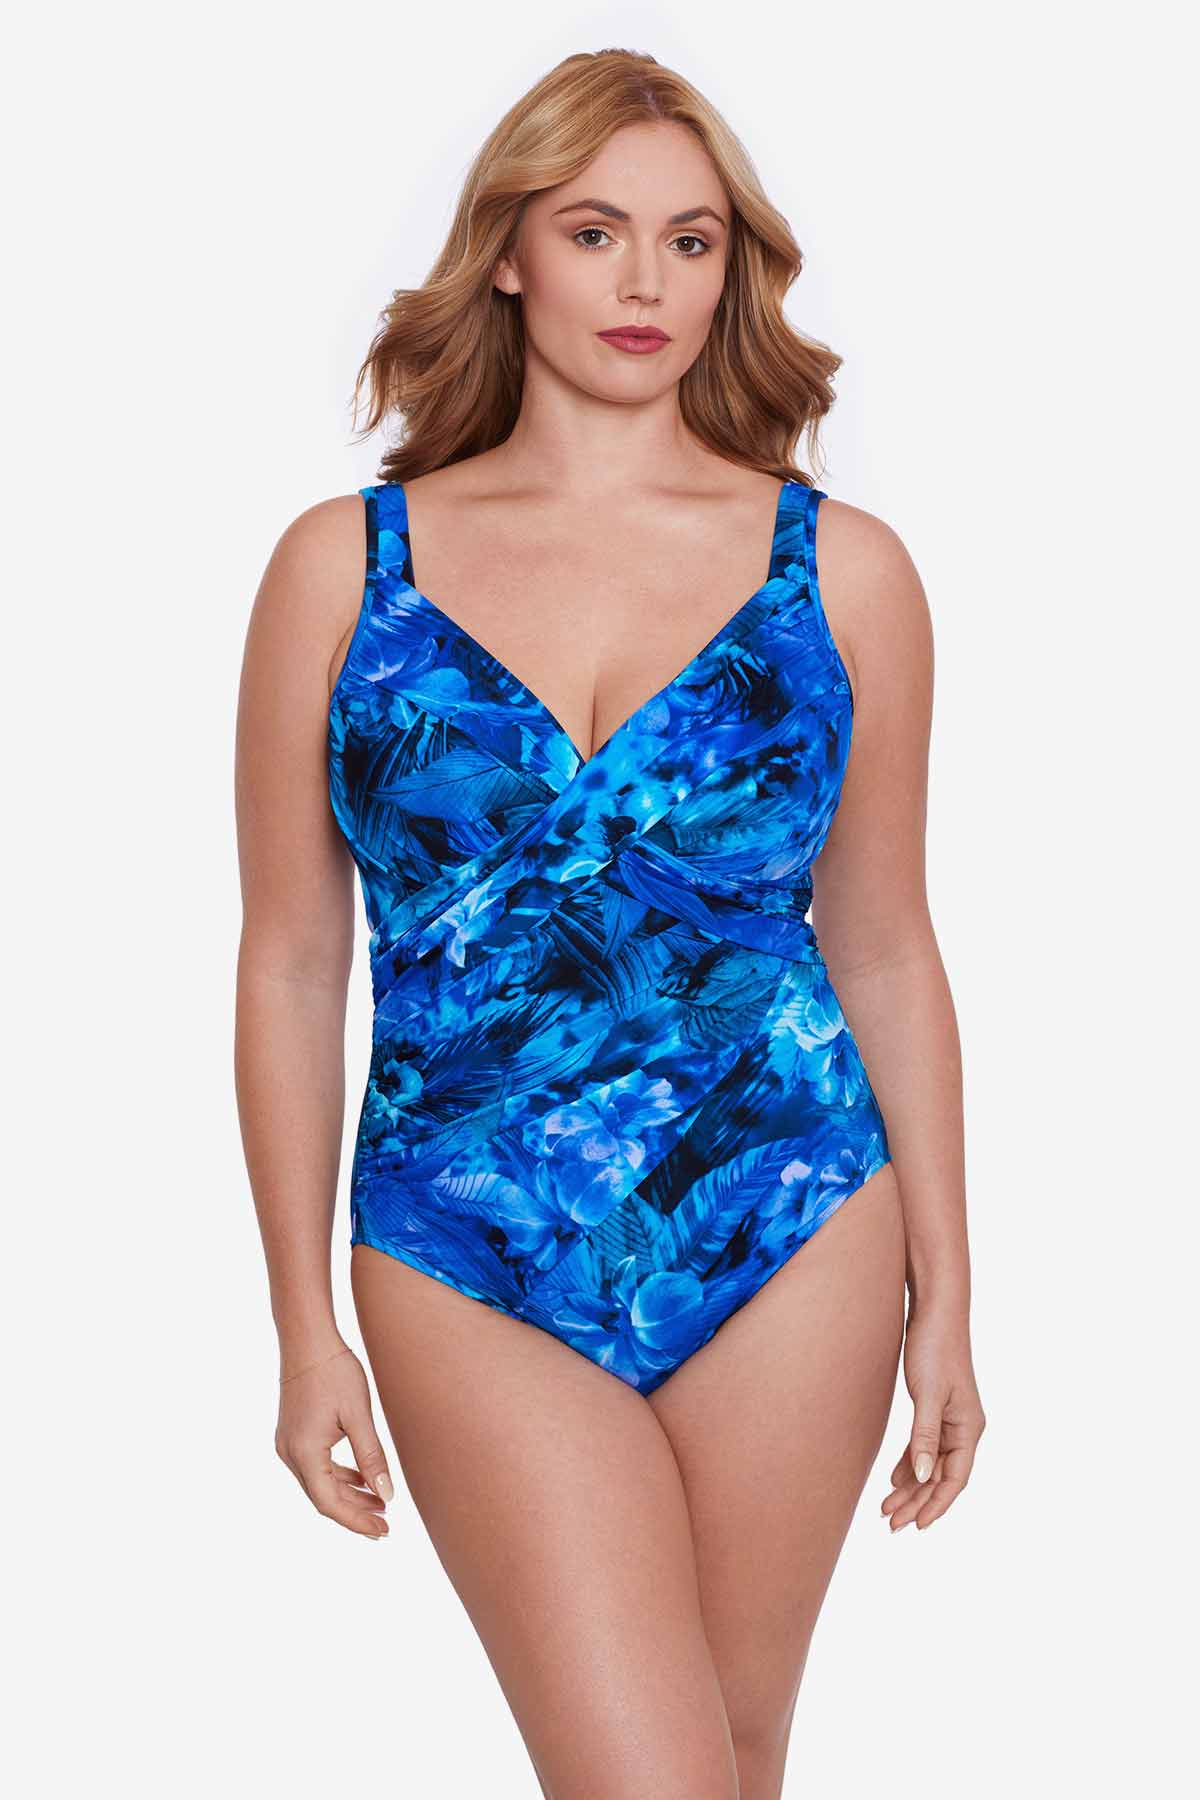 7 Reasons Why You Should Try a Tankini This Swim Season – Miraclesuit